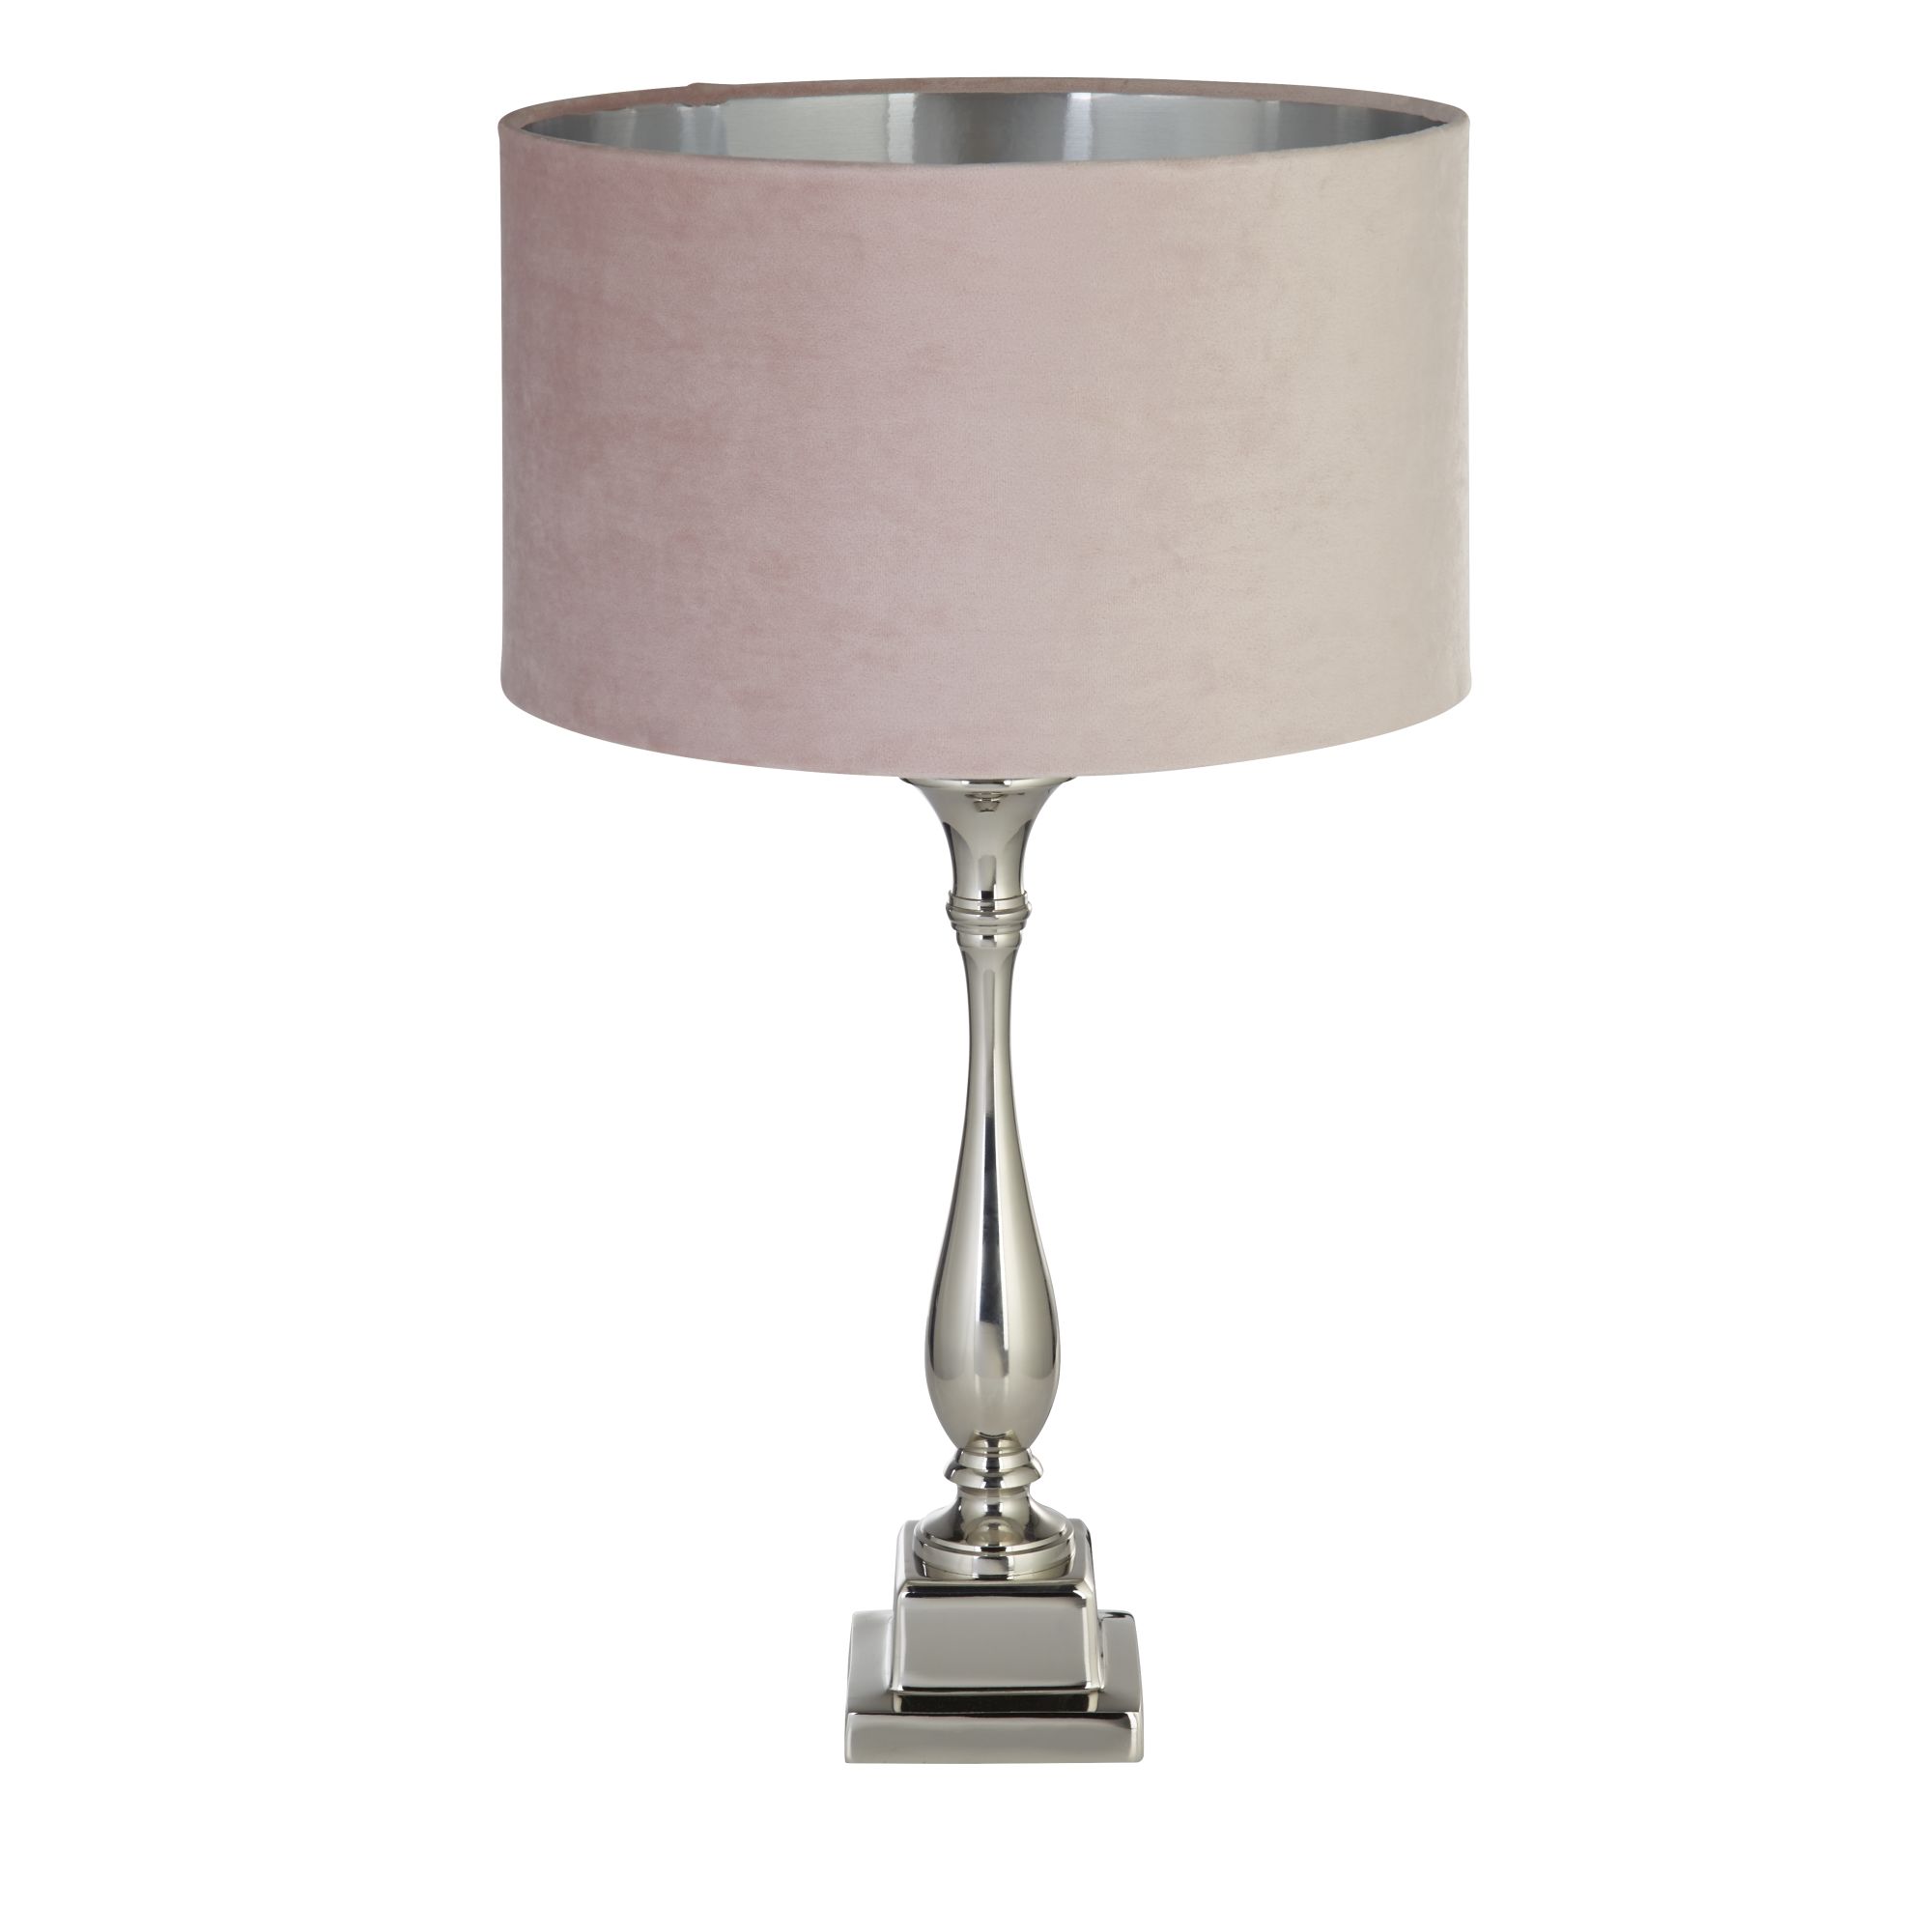 Lux & Belle BASE ONLY Candlestick Table Lamp - Chrome Metal